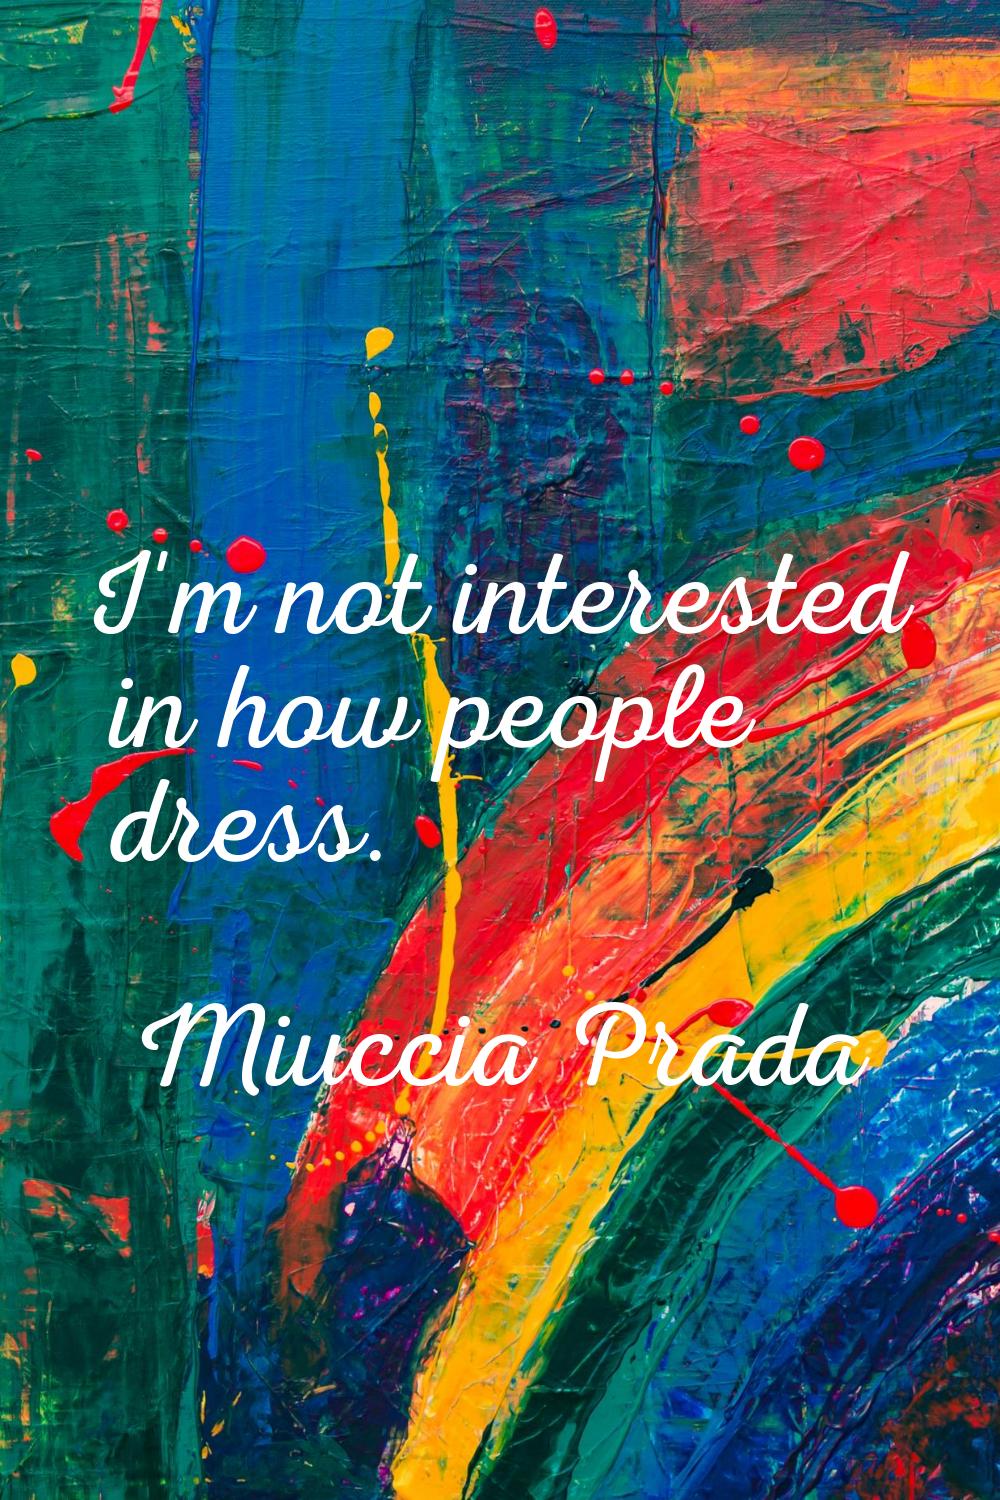 I'm not interested in how people dress.